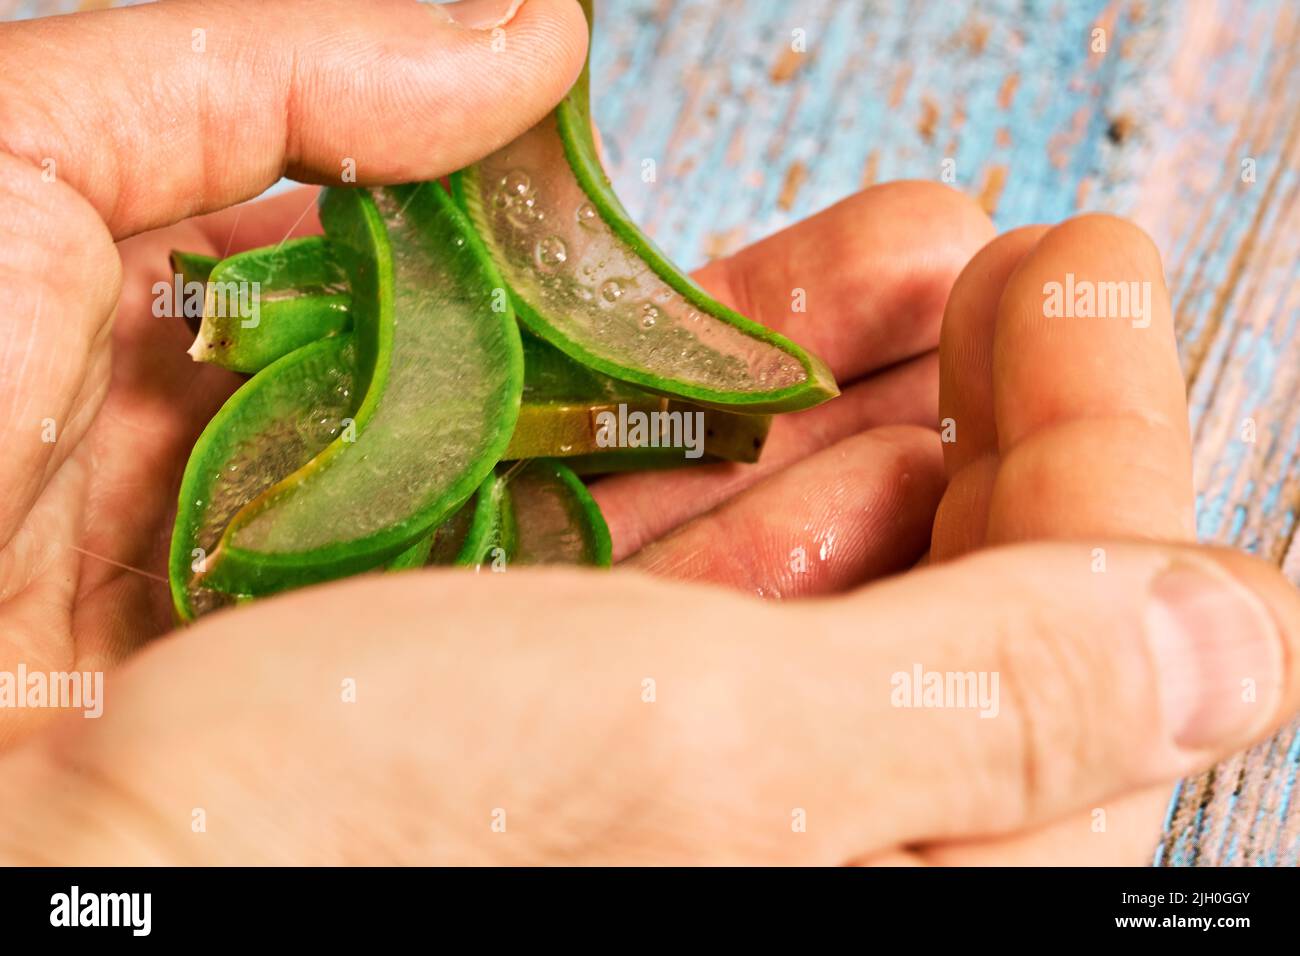 Pieces of aloe vera leaf and its gel Stock Photo